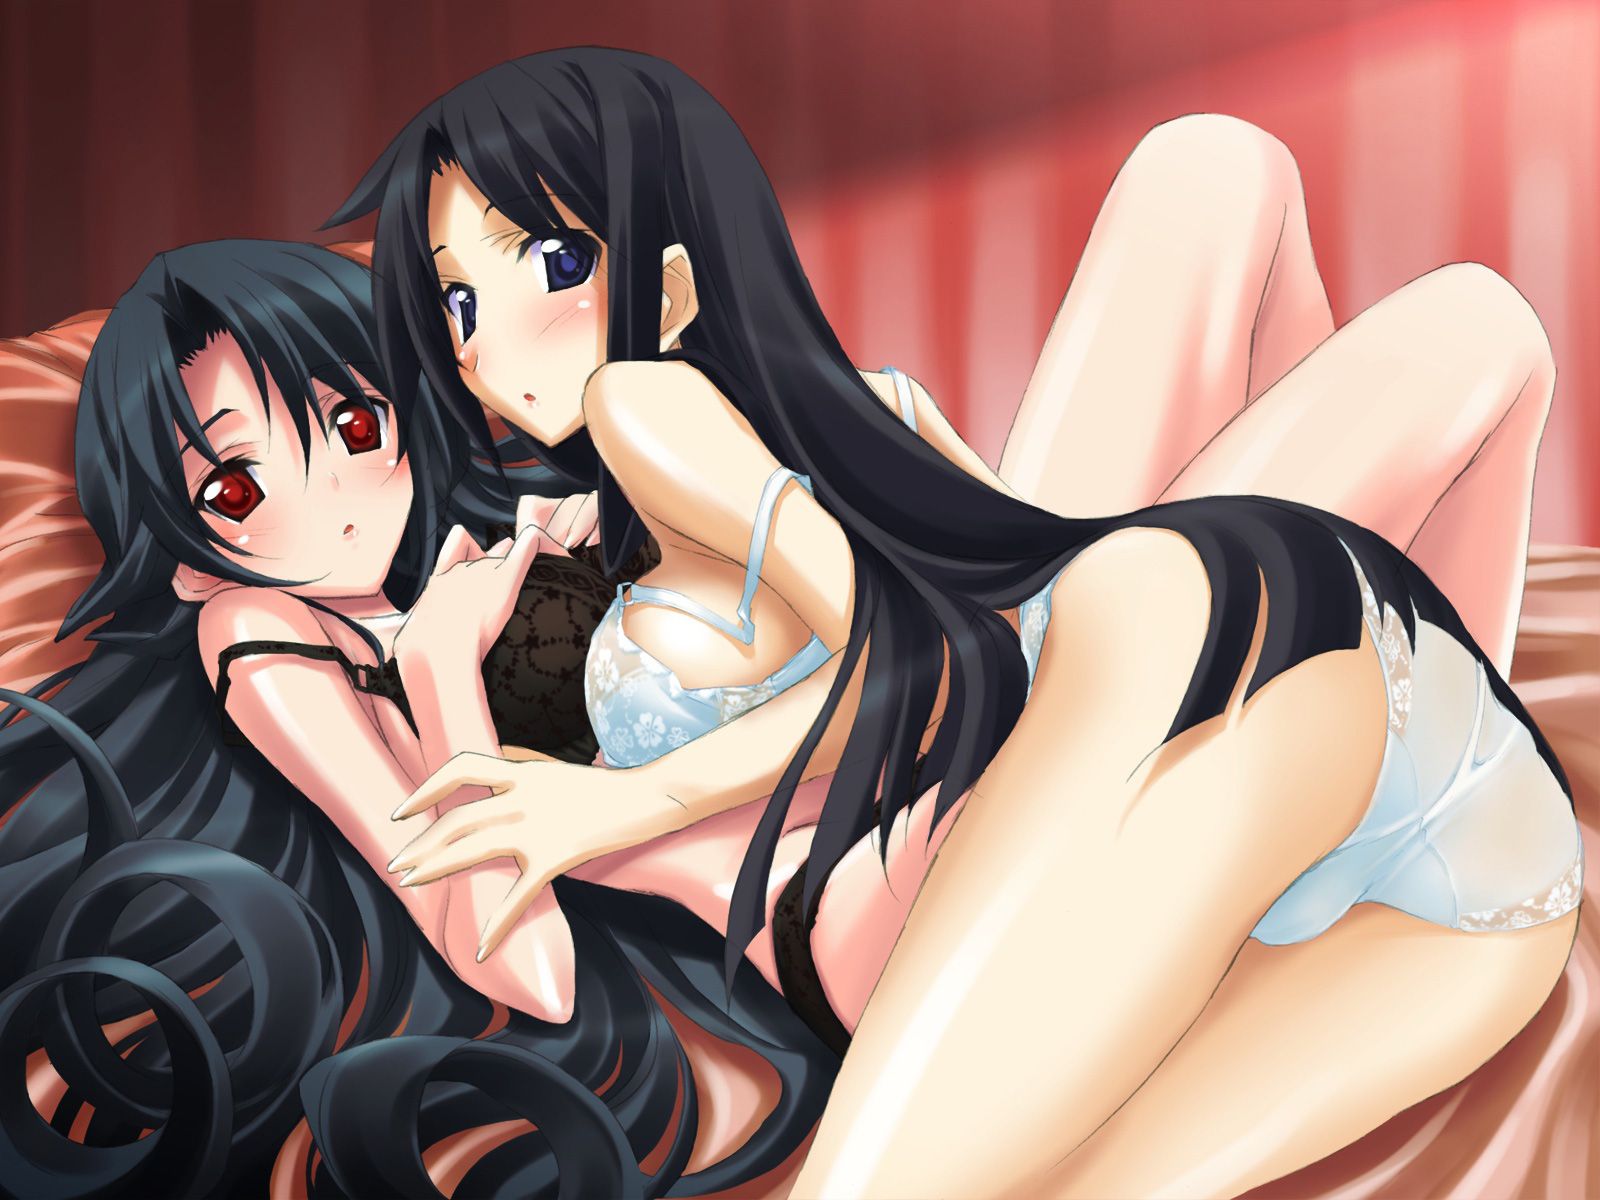 2-d black hair long girl is the cutest in the world! 50 sheets 29